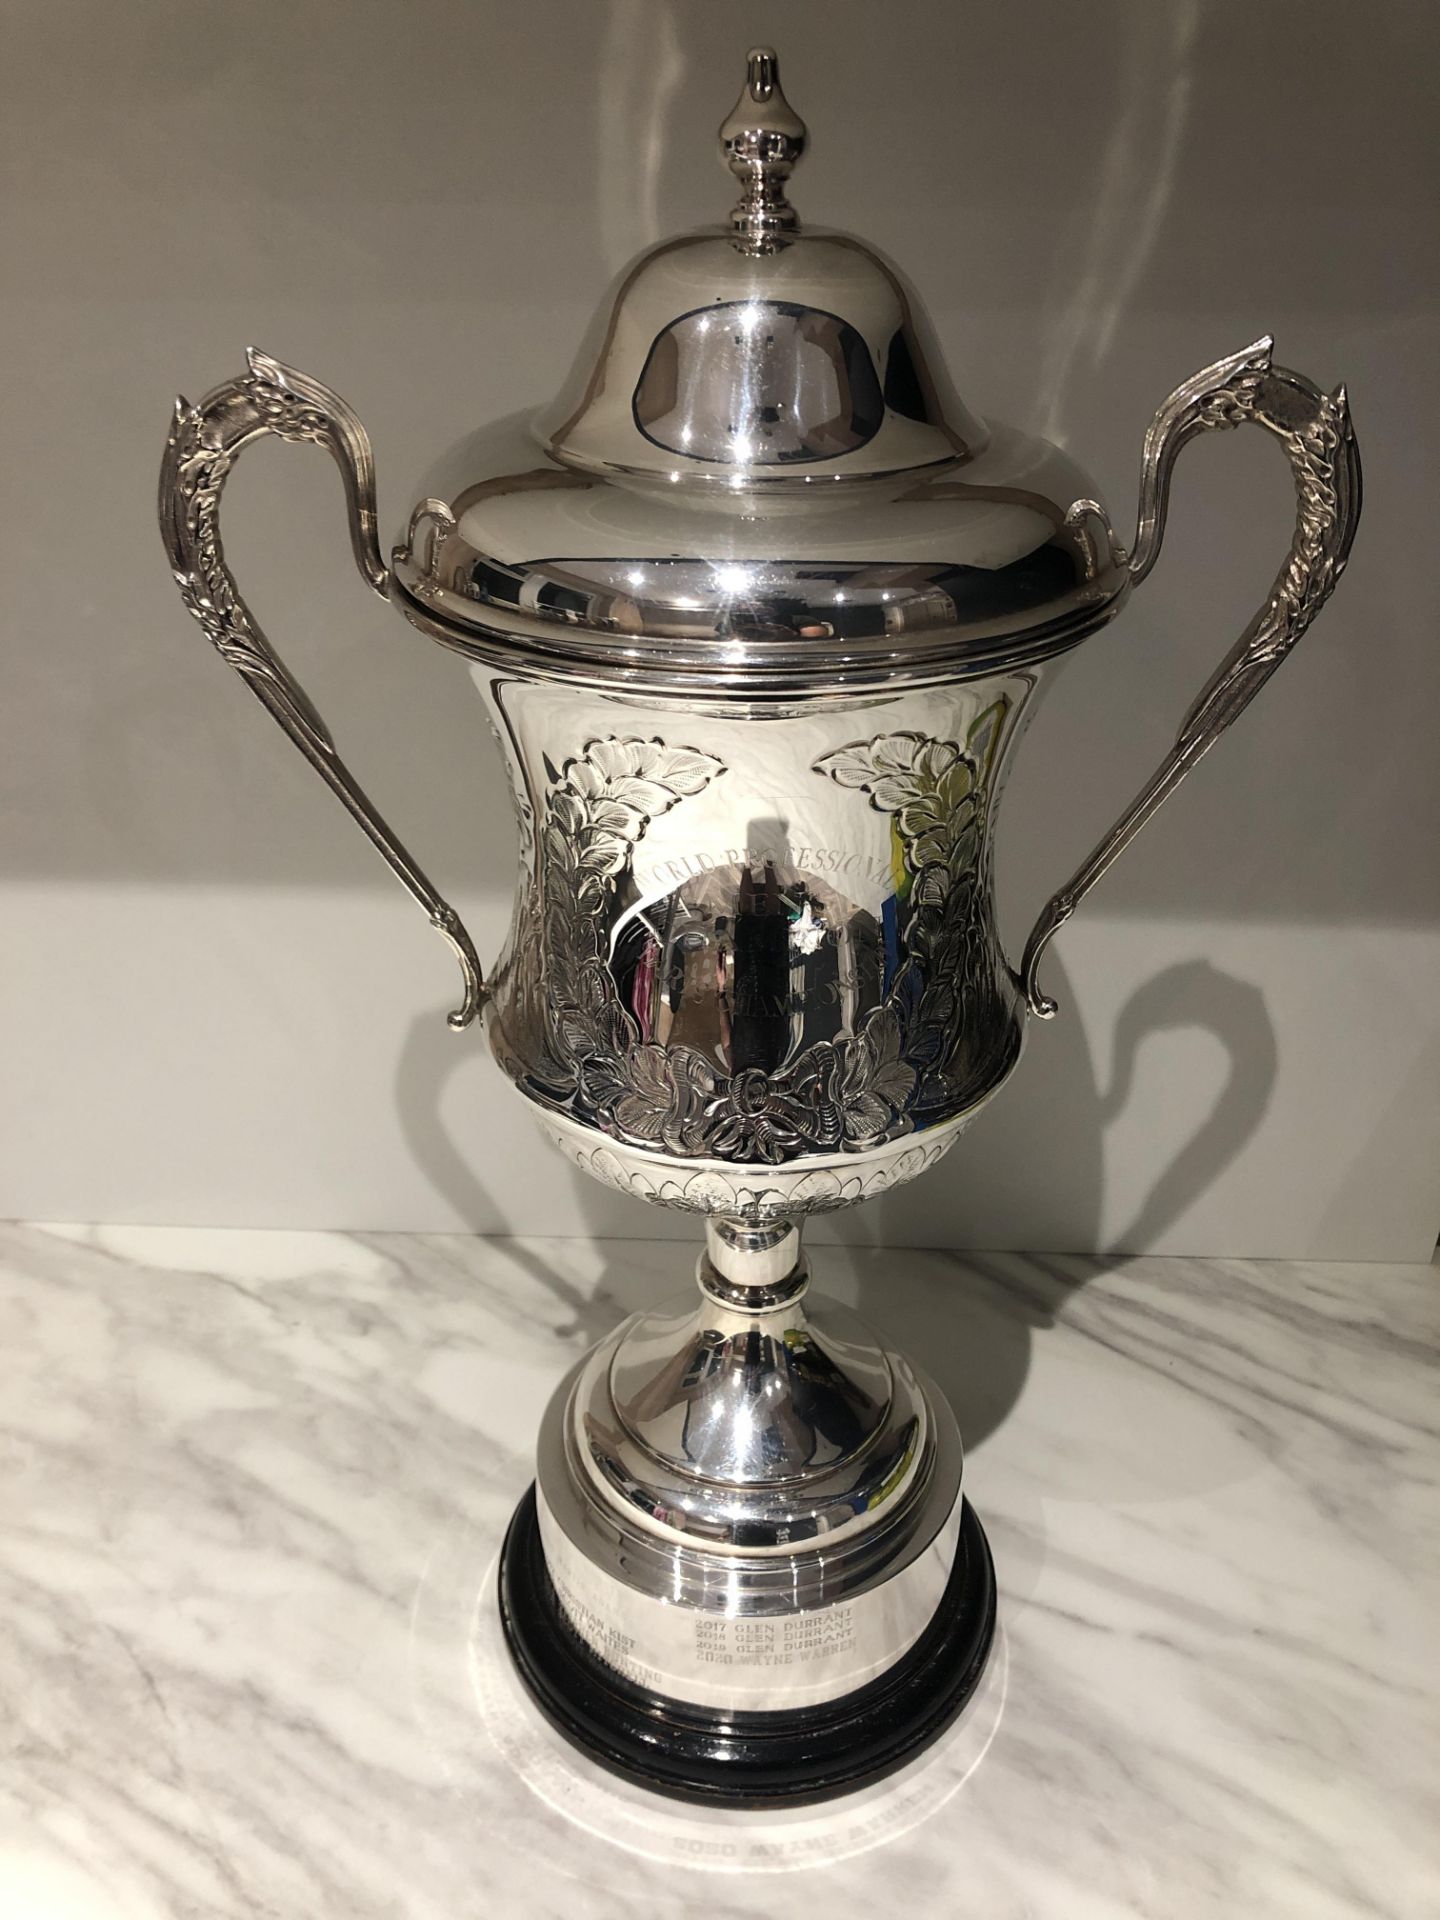 The Men's World Professional Trophy